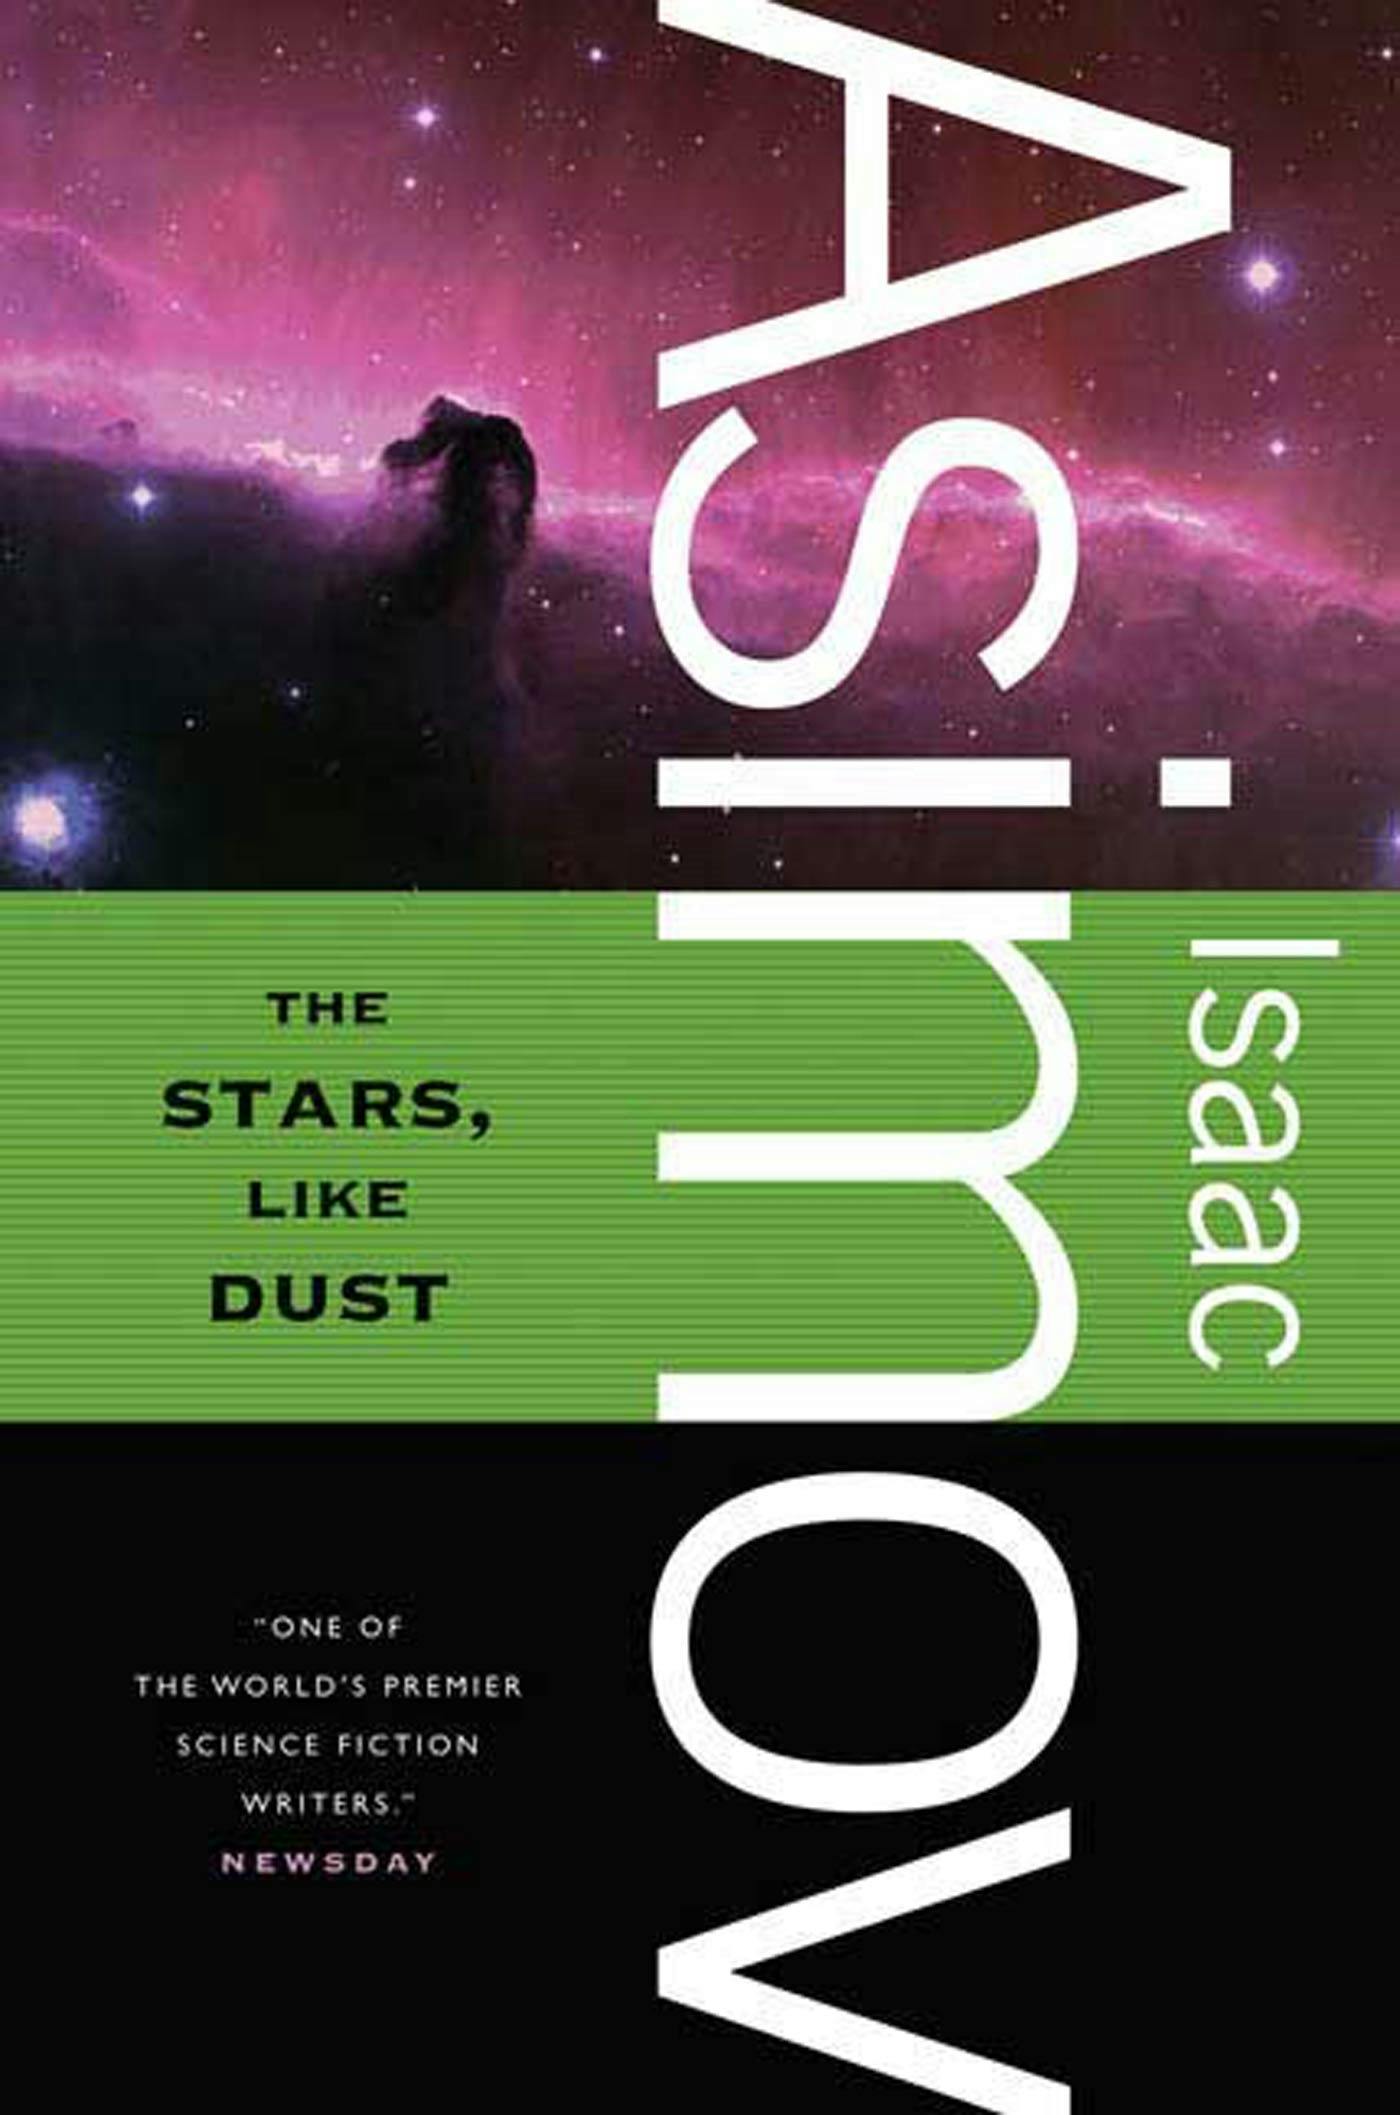 Cover for the book titled as: The Stars, Like Dust